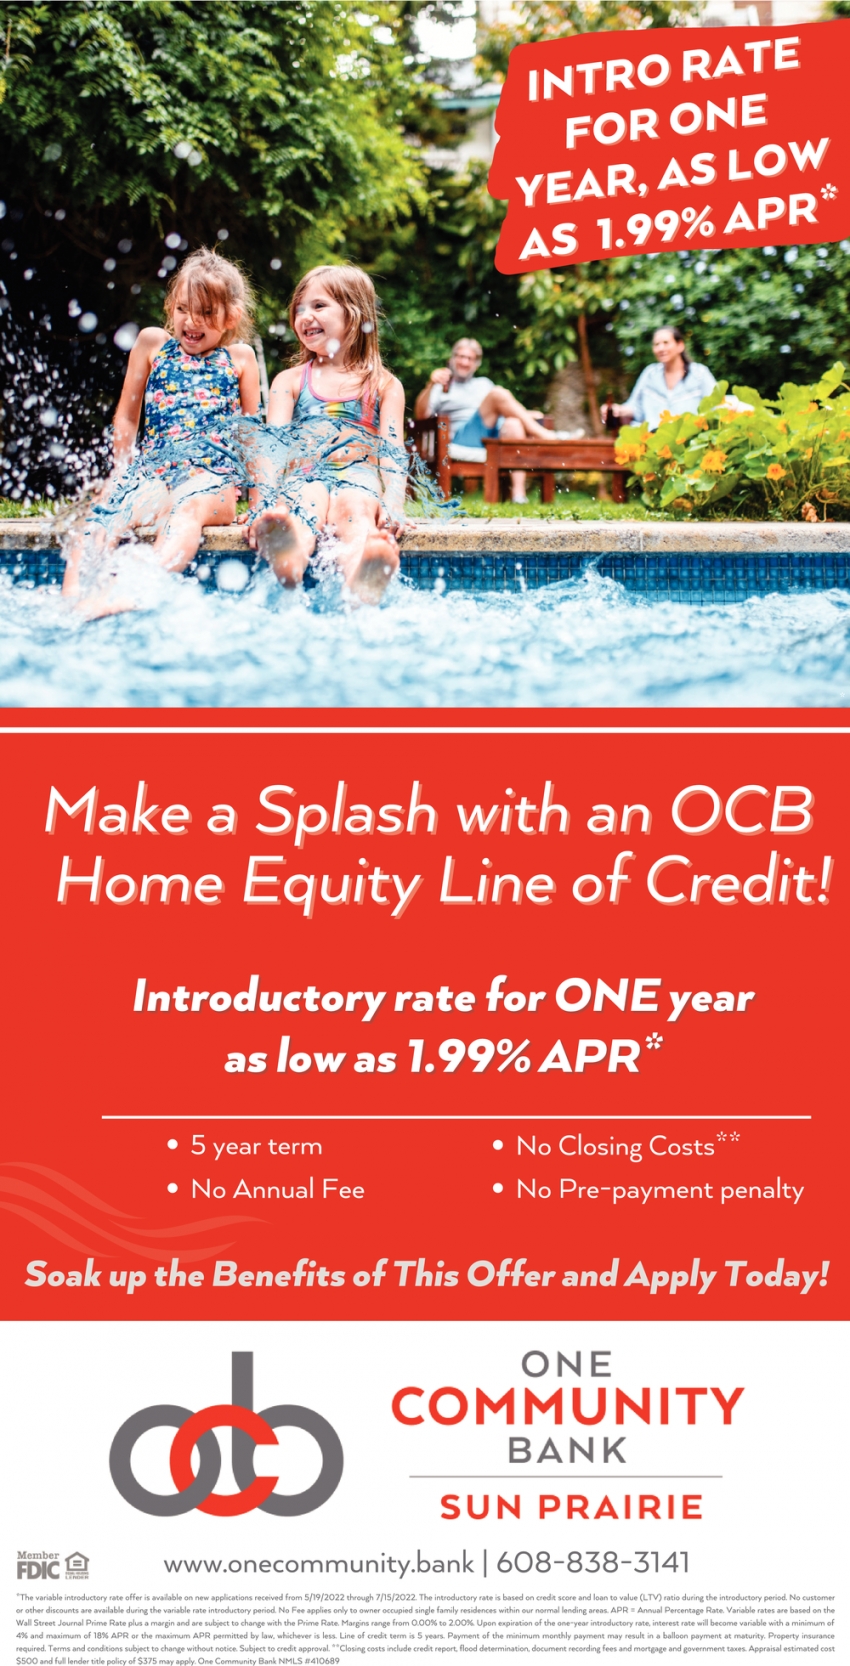 Intro Rate for One Year